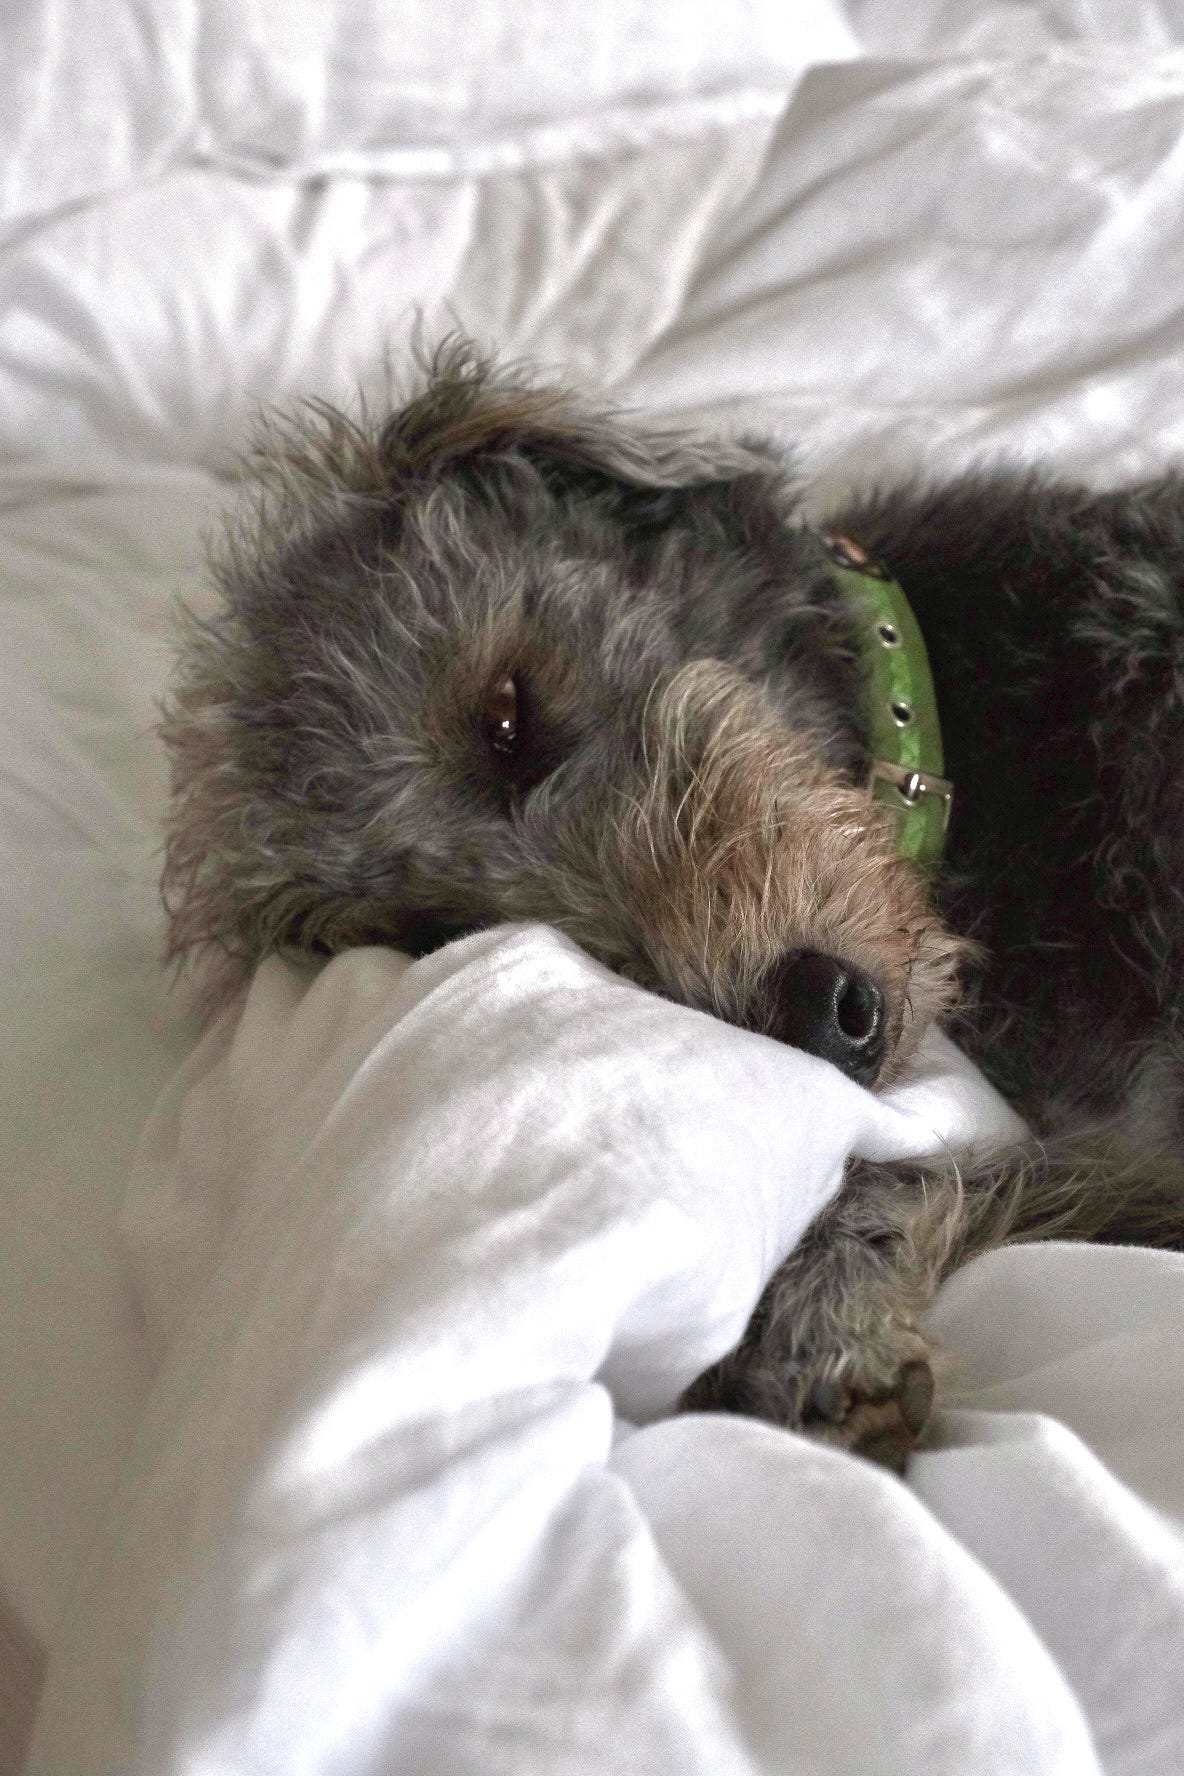 A sleepy looking grey lurcher dog curled up on white linen bedding